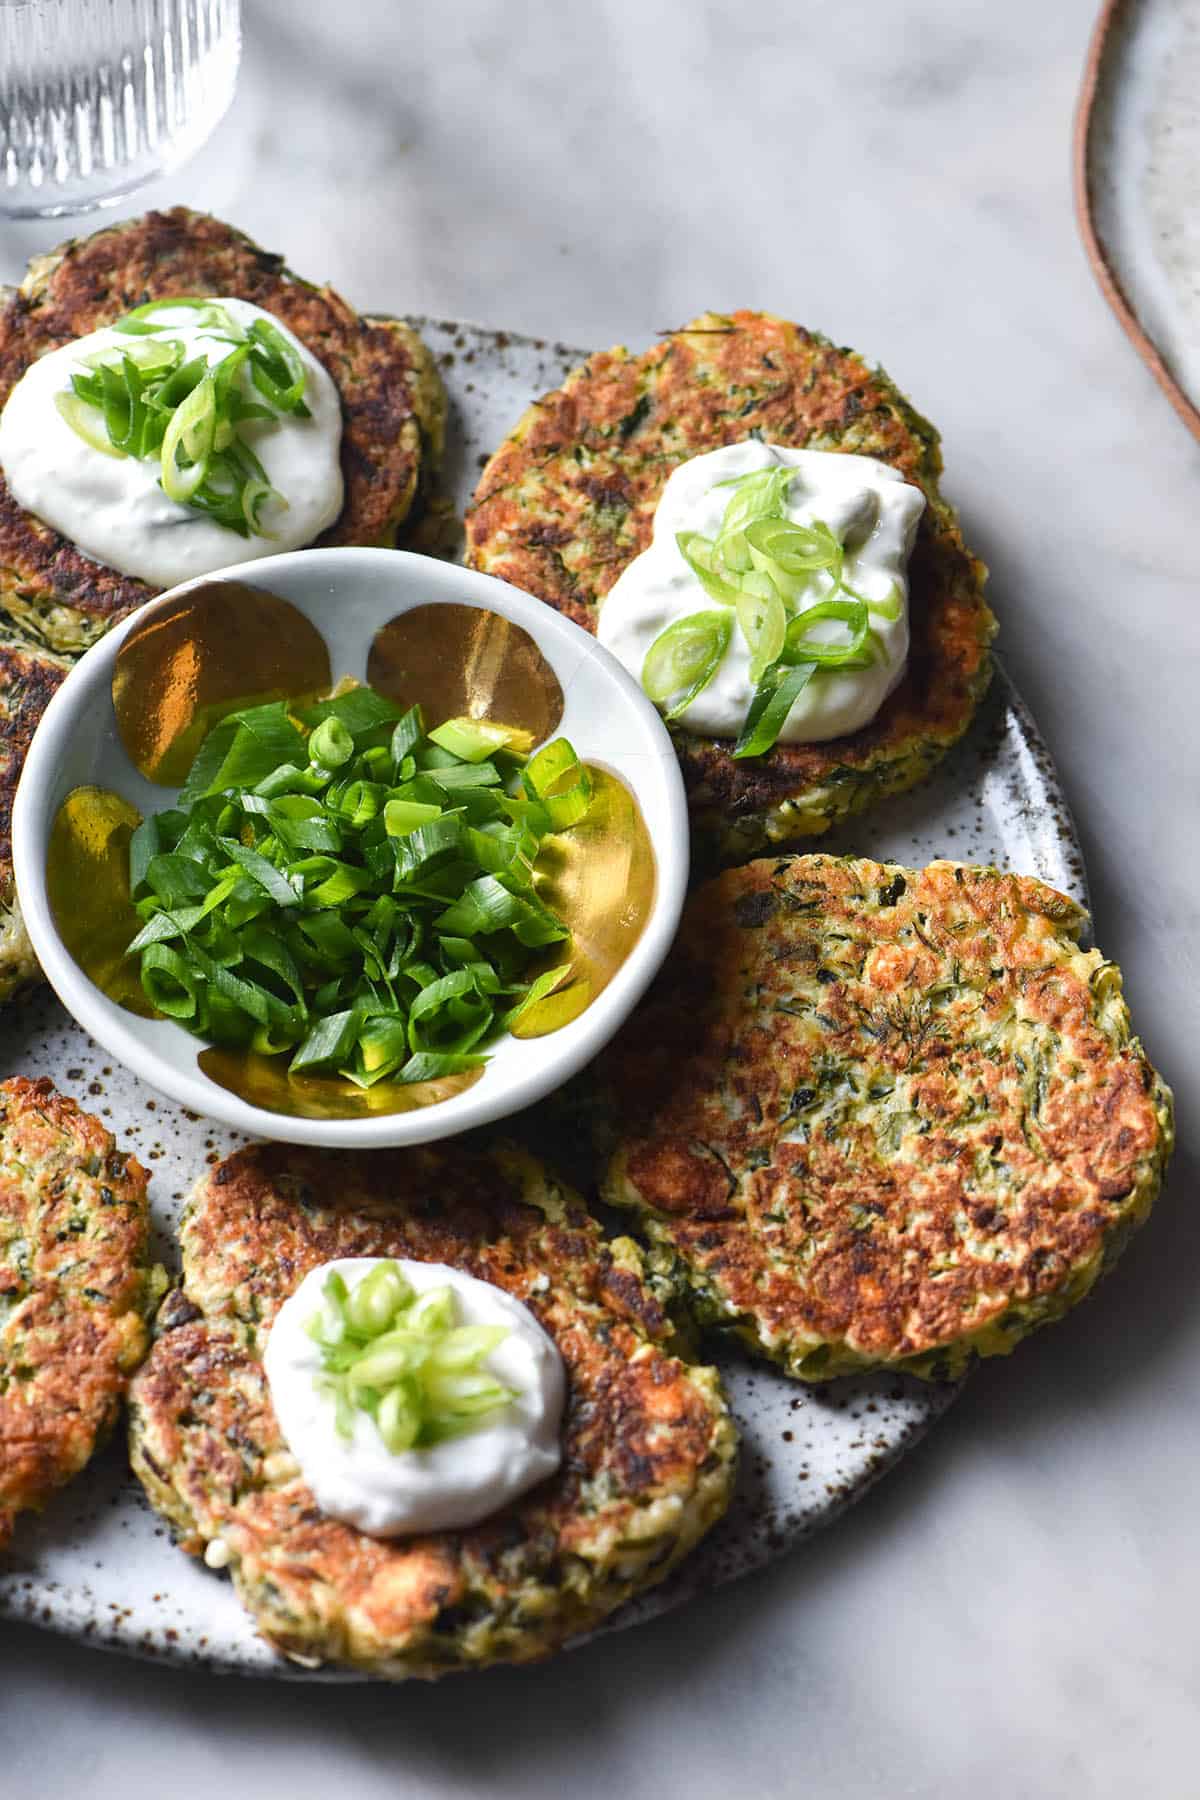 An aerial view of gluten free zucchini fritters topped with a dollop of yoghurt and spring onion greens on a white speckled ceramic plate. The fritters are in a circle surrounding a small bowl filled with extra spring onion greens. A glass of water and an extra white plate sit on the white marble table background